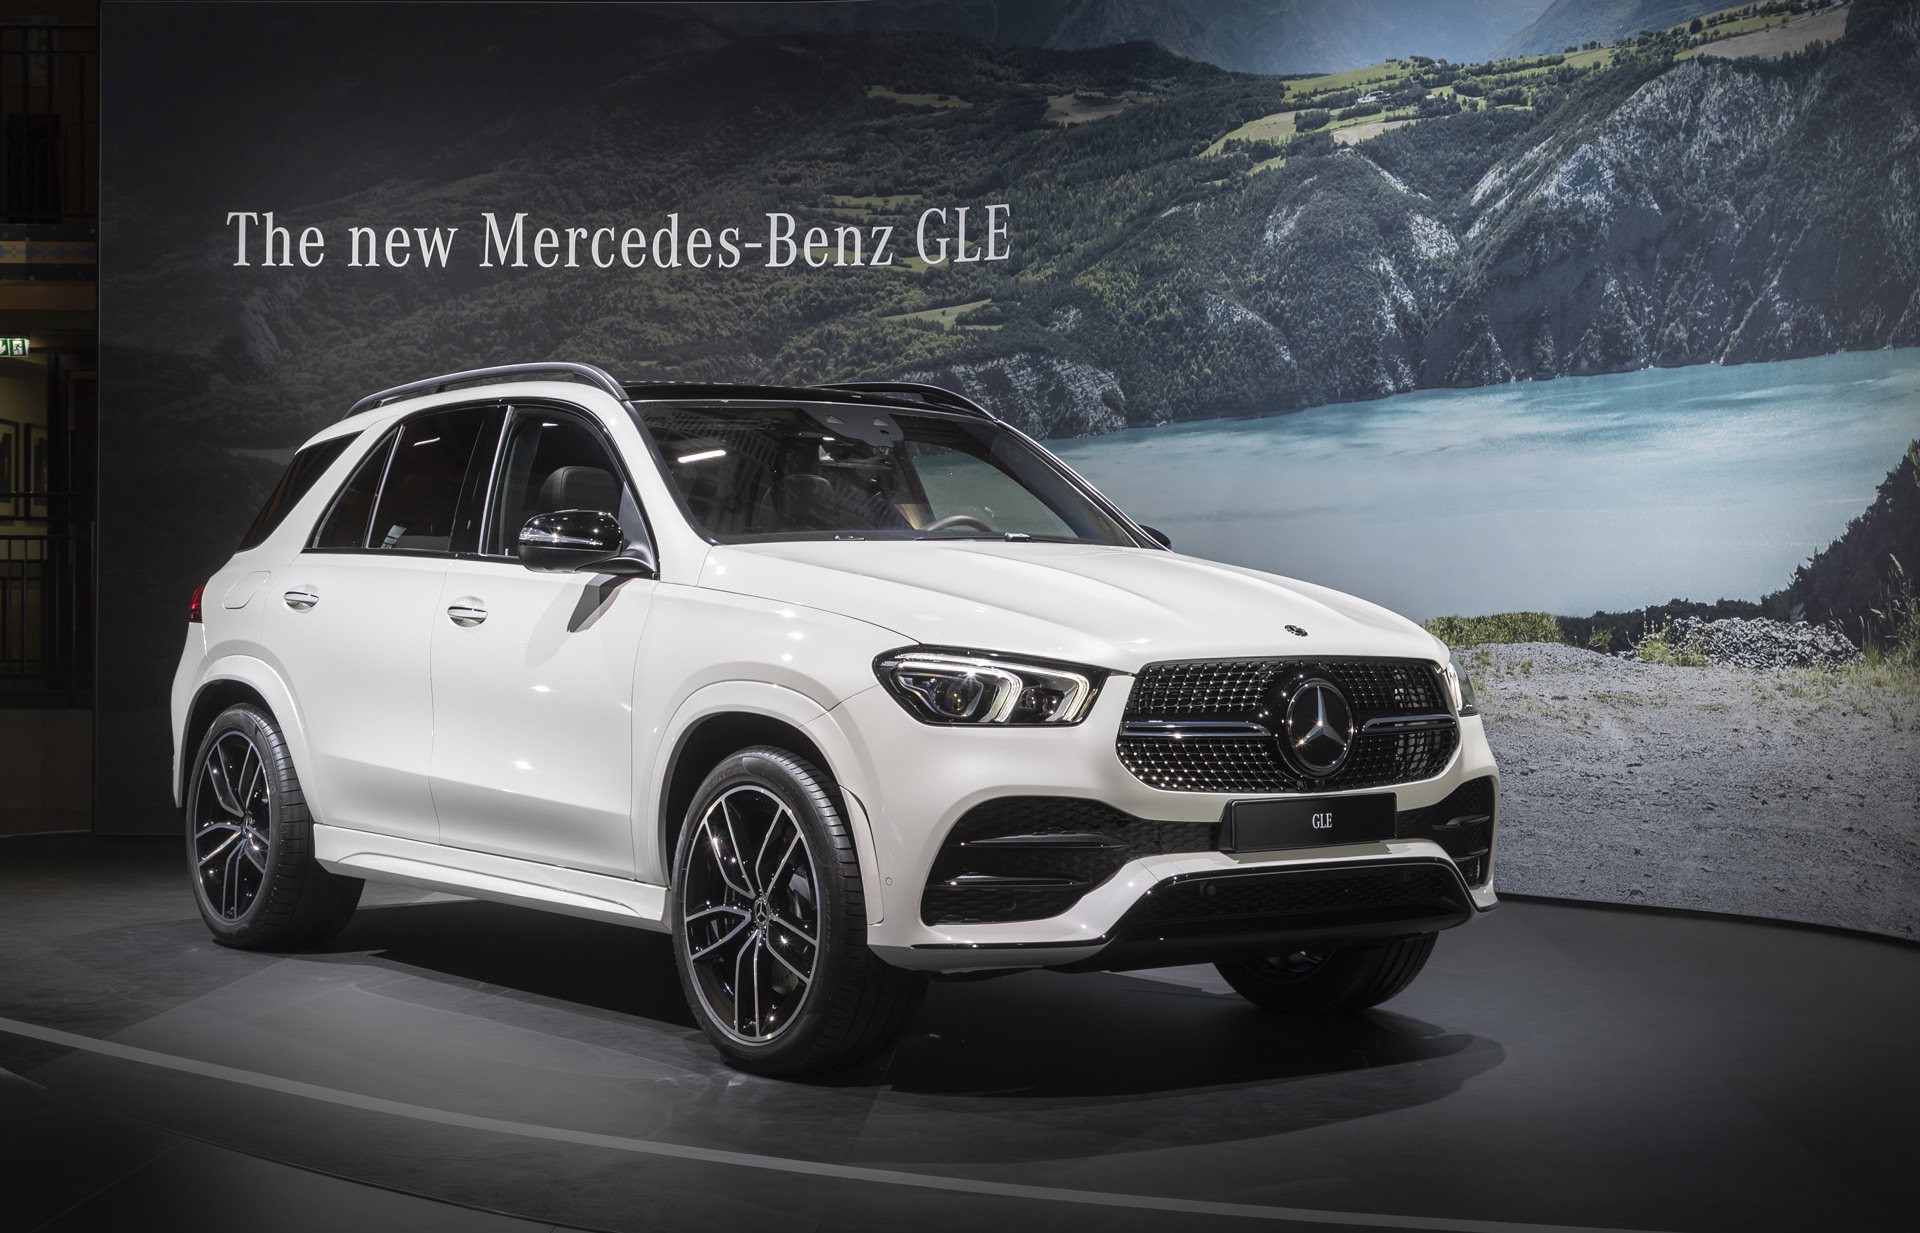 2020 Mercedes-Benz GLE plug-in hybrid to have 60 miles of electric range?